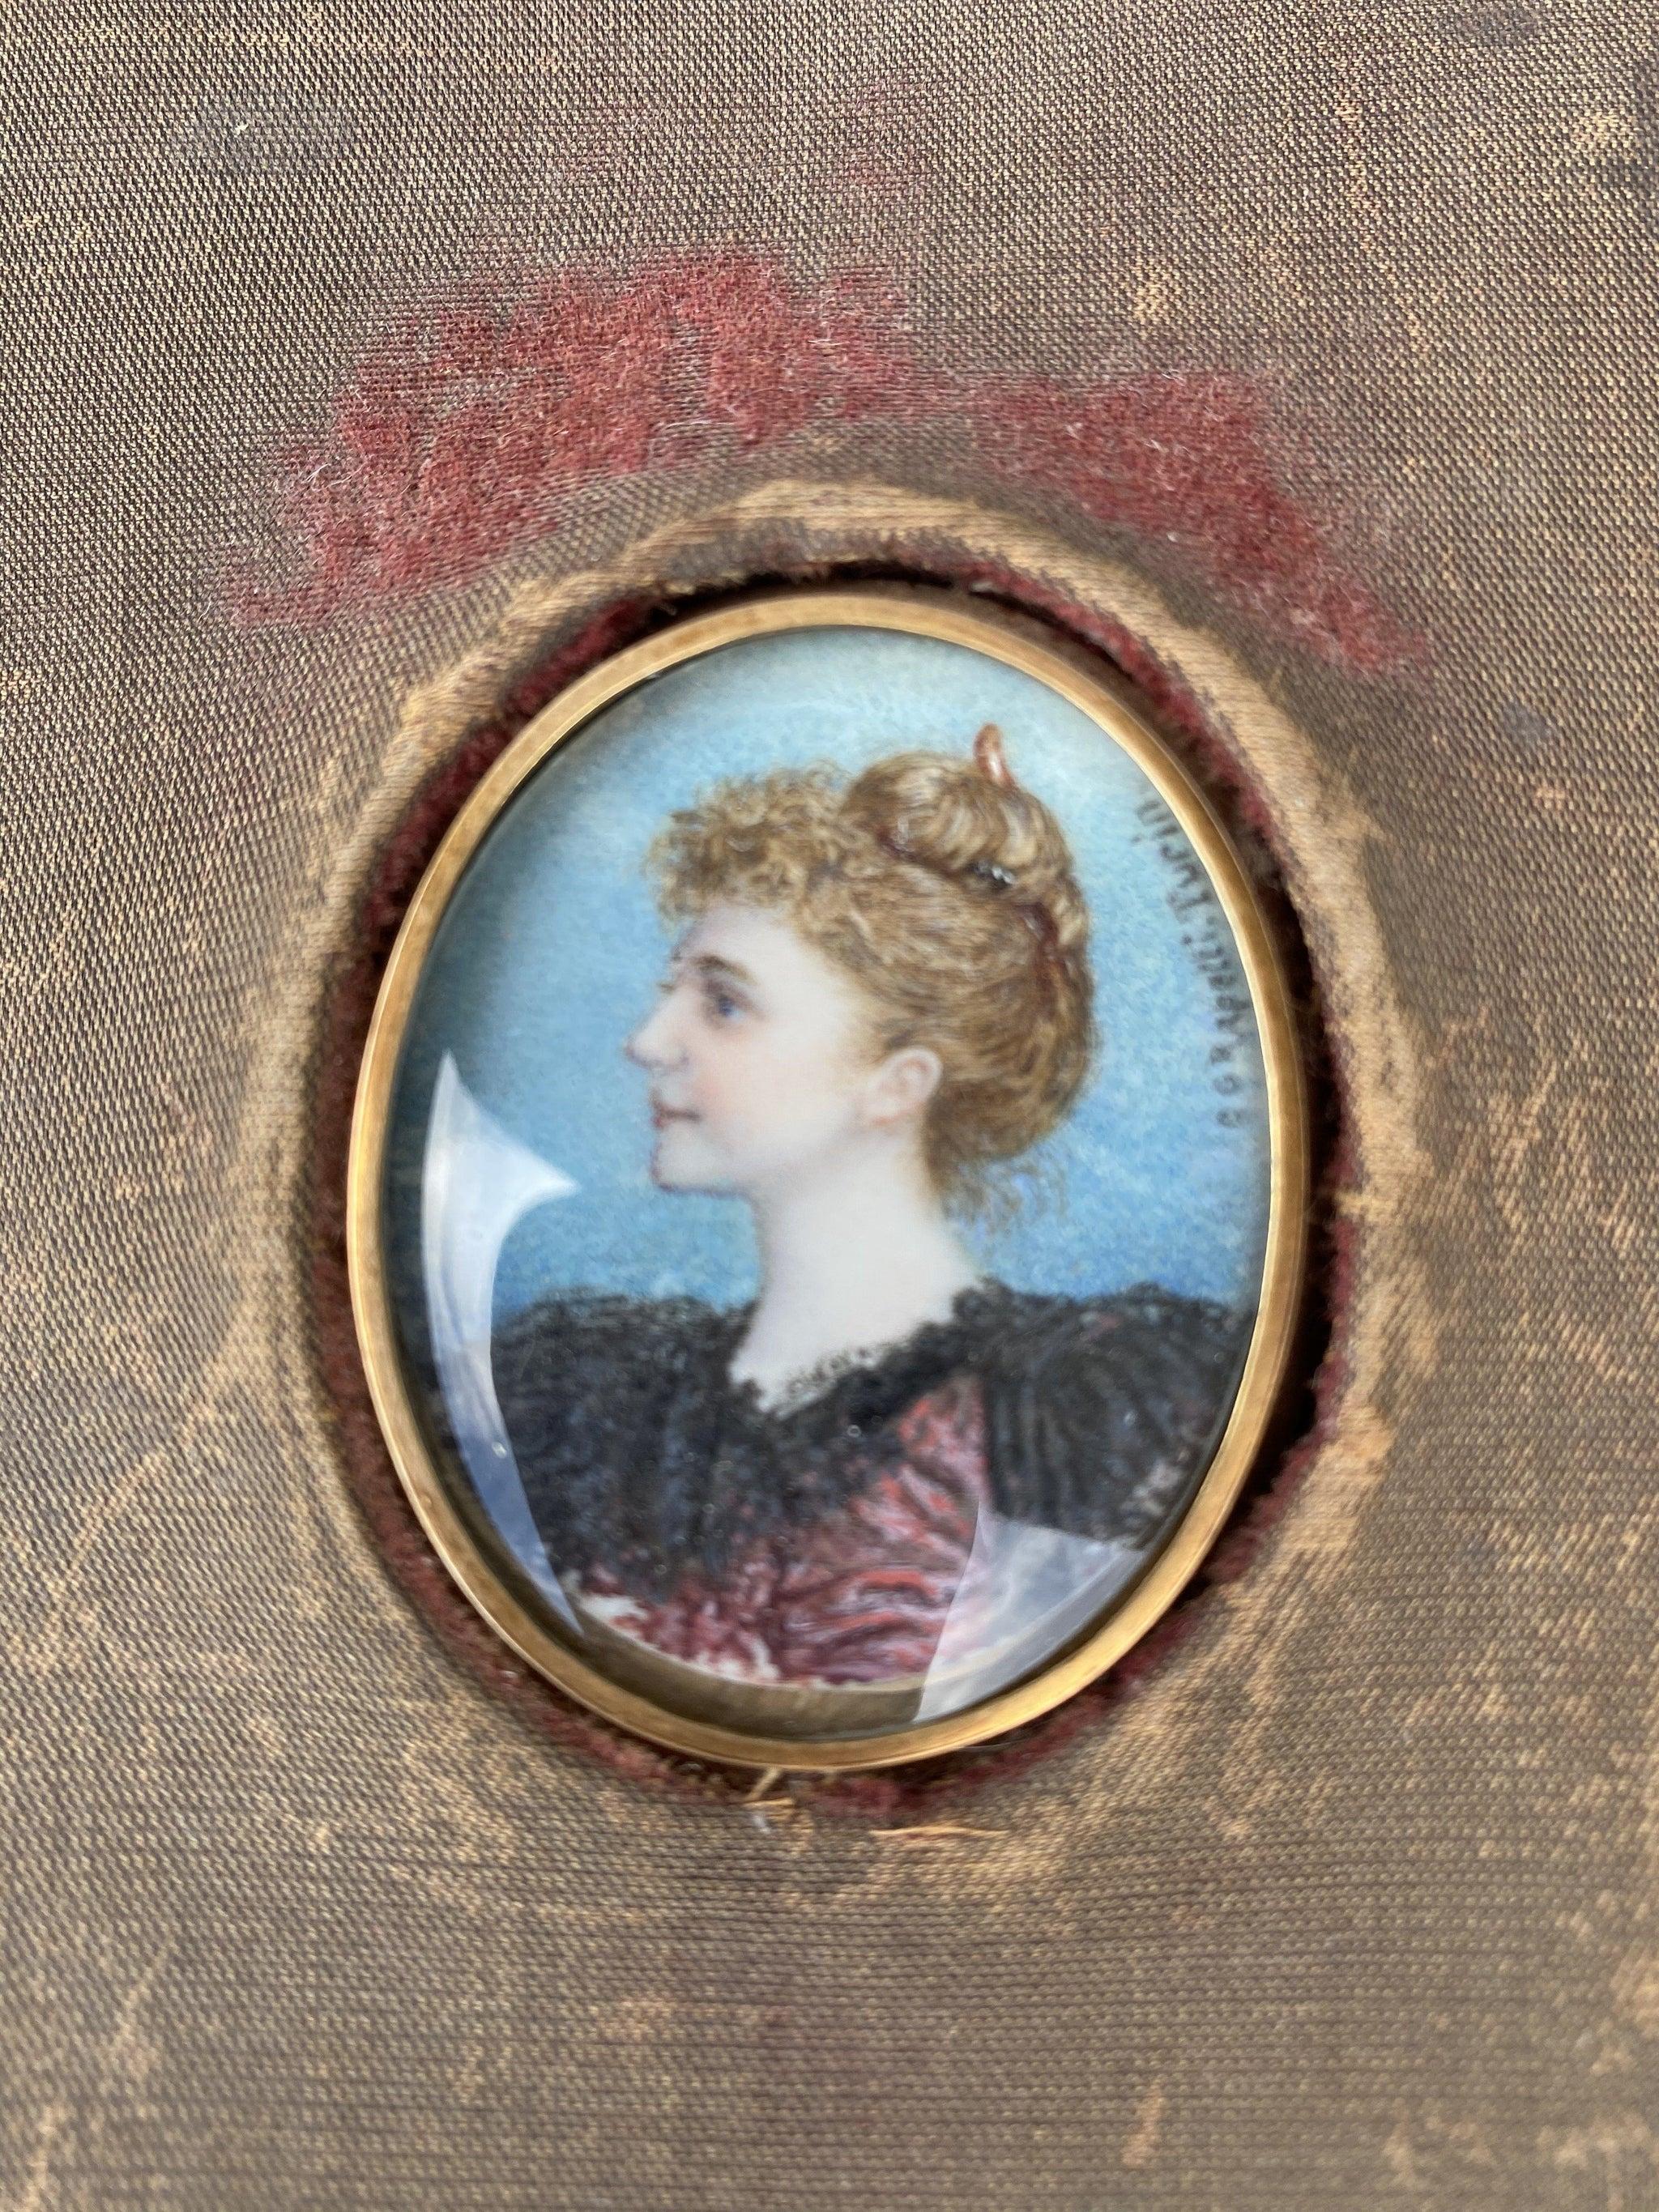 Portrait miniature of a young woman from the Gourdin family, Charleston, C.G. Rapetti (Italian, 19th century). Watercolour, framed in case, signed: C.G. Rapetti Turin. Provenance: Property descended in the prominent early Charleston South Carolina